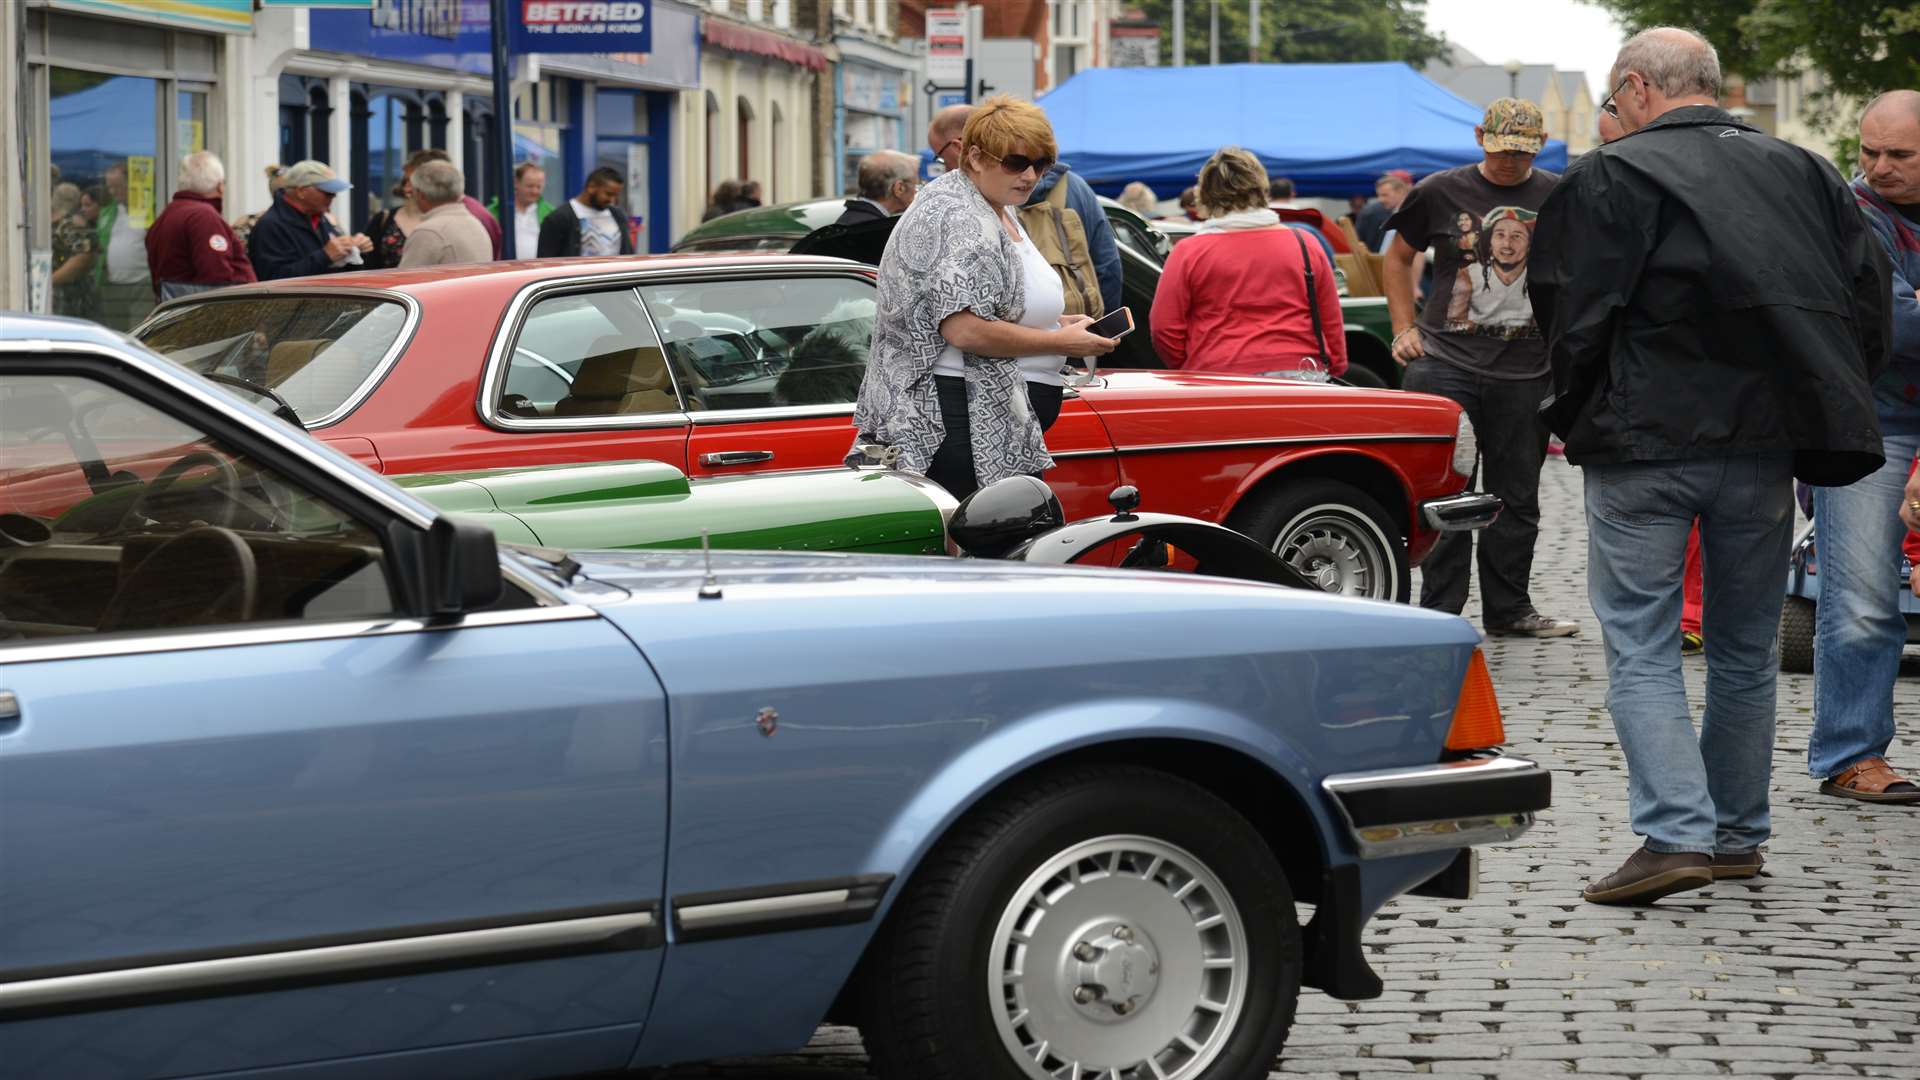 The classic car show held in the town centre